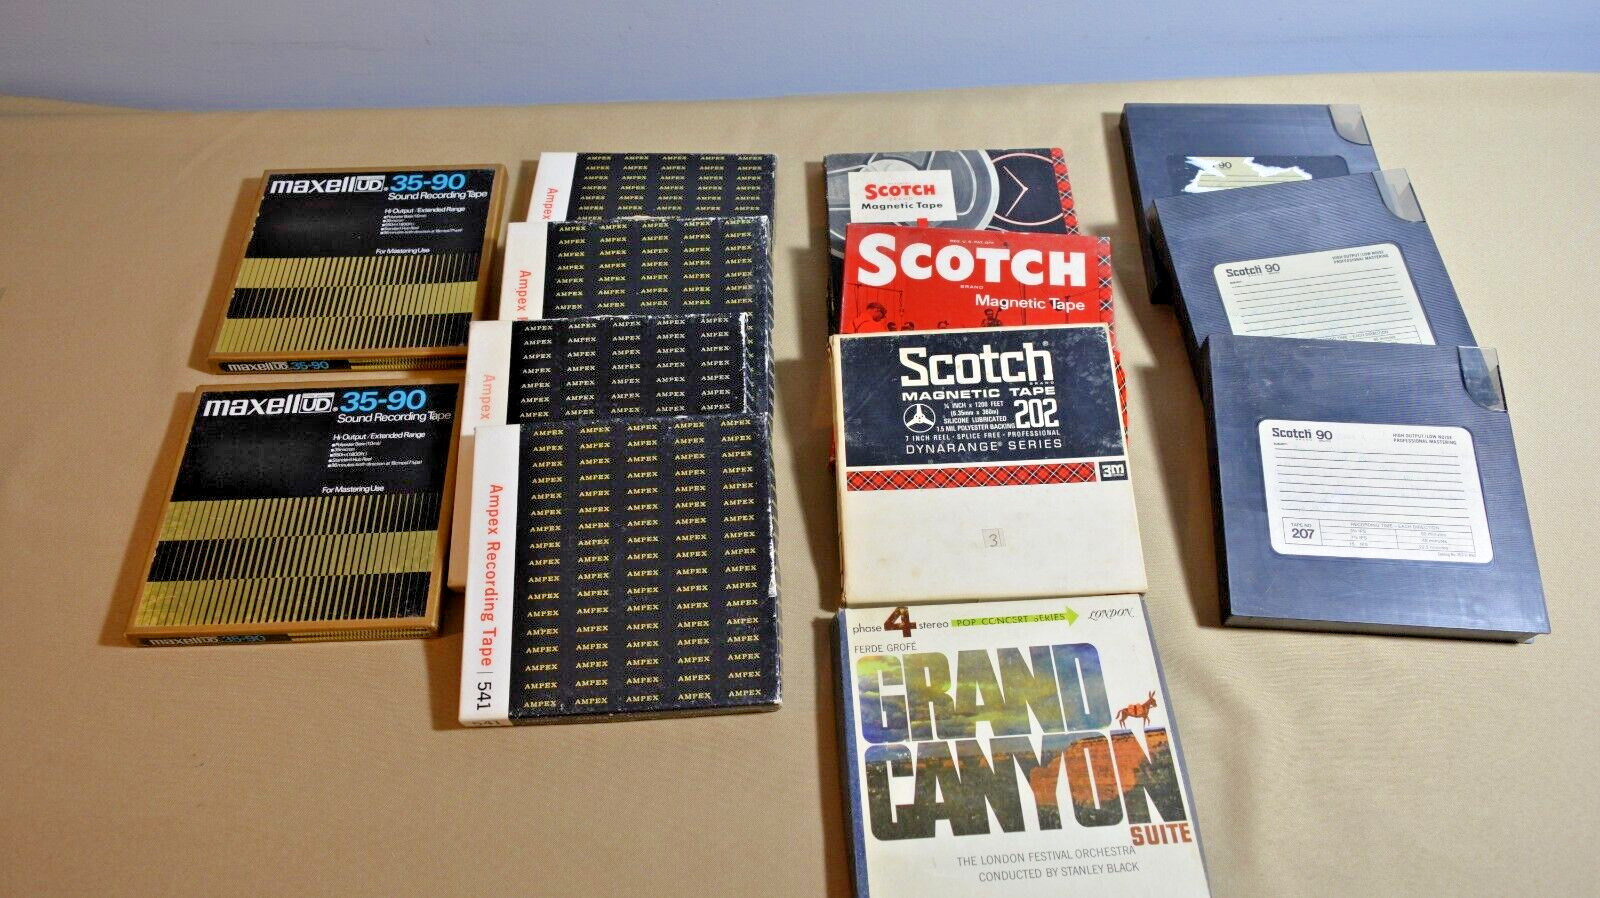 Assortment of prerecord reel tapes  Scotch 90 Ampex Grand Canyon Suite 11 tapes